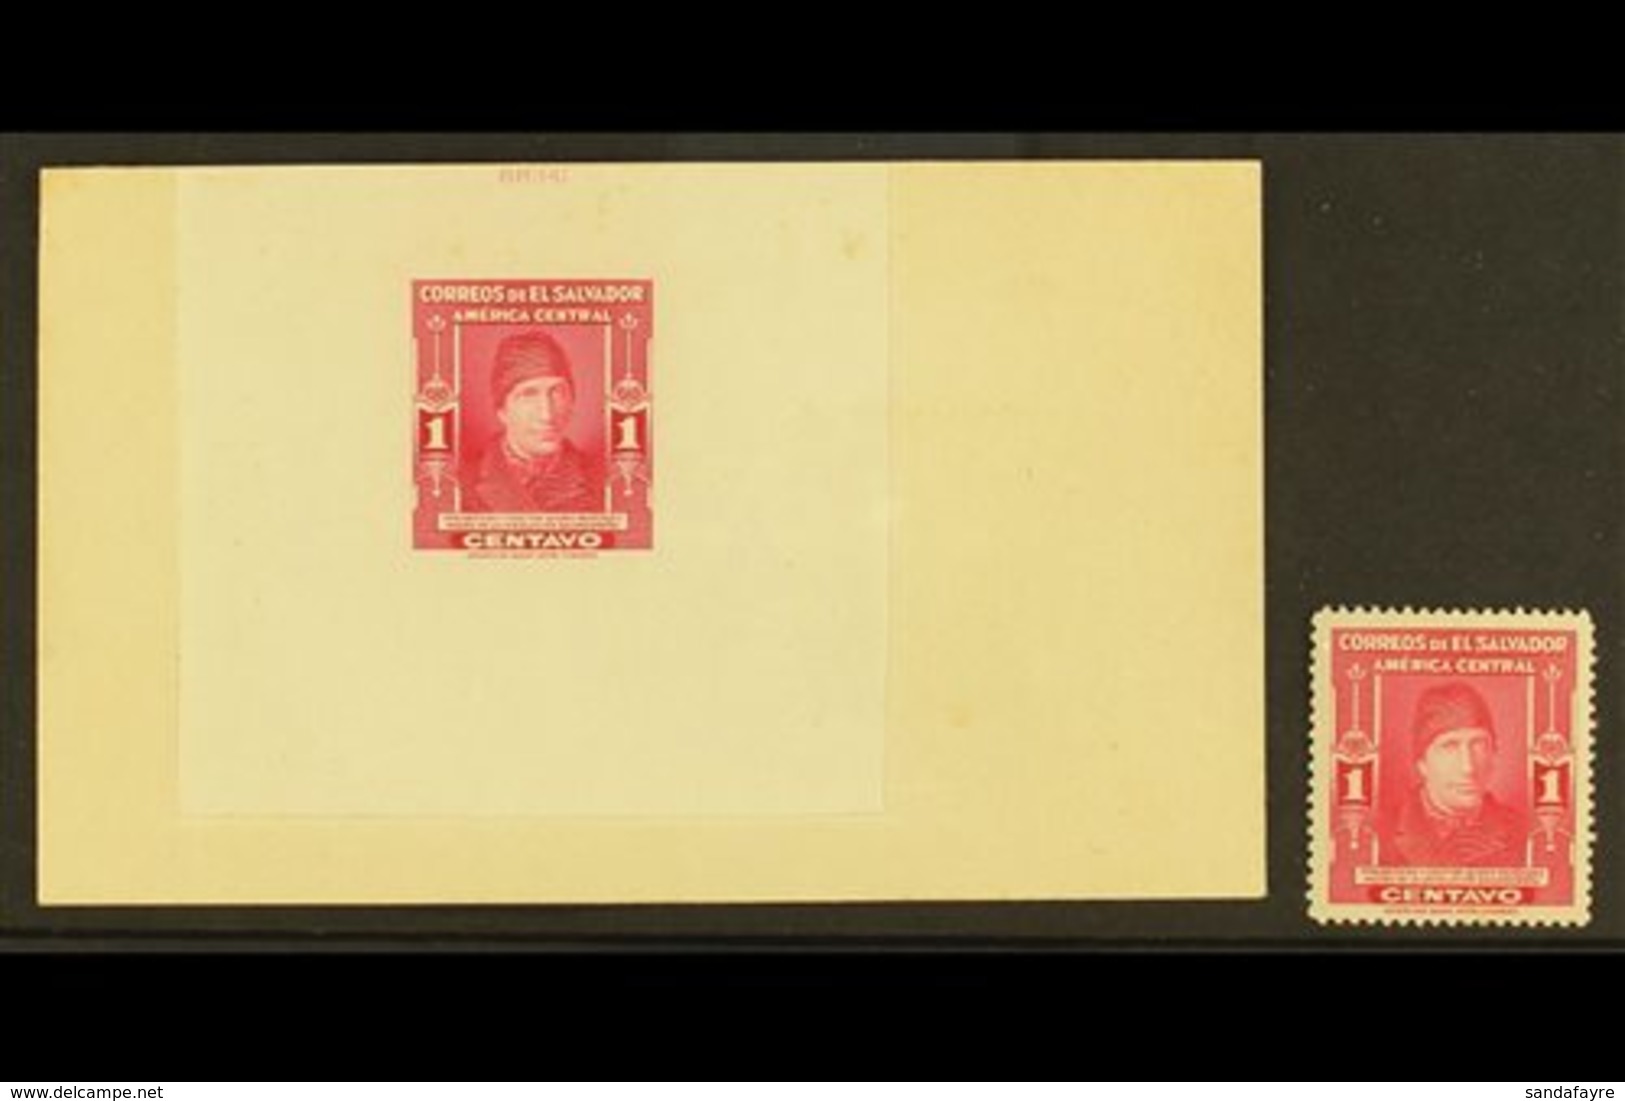 1947 1c Carmine Isidro Menendez (SG 950, Scott 596) - A DIE PROOF Affixed To Sunken Card, With American Bank Note Compan - El Salvador